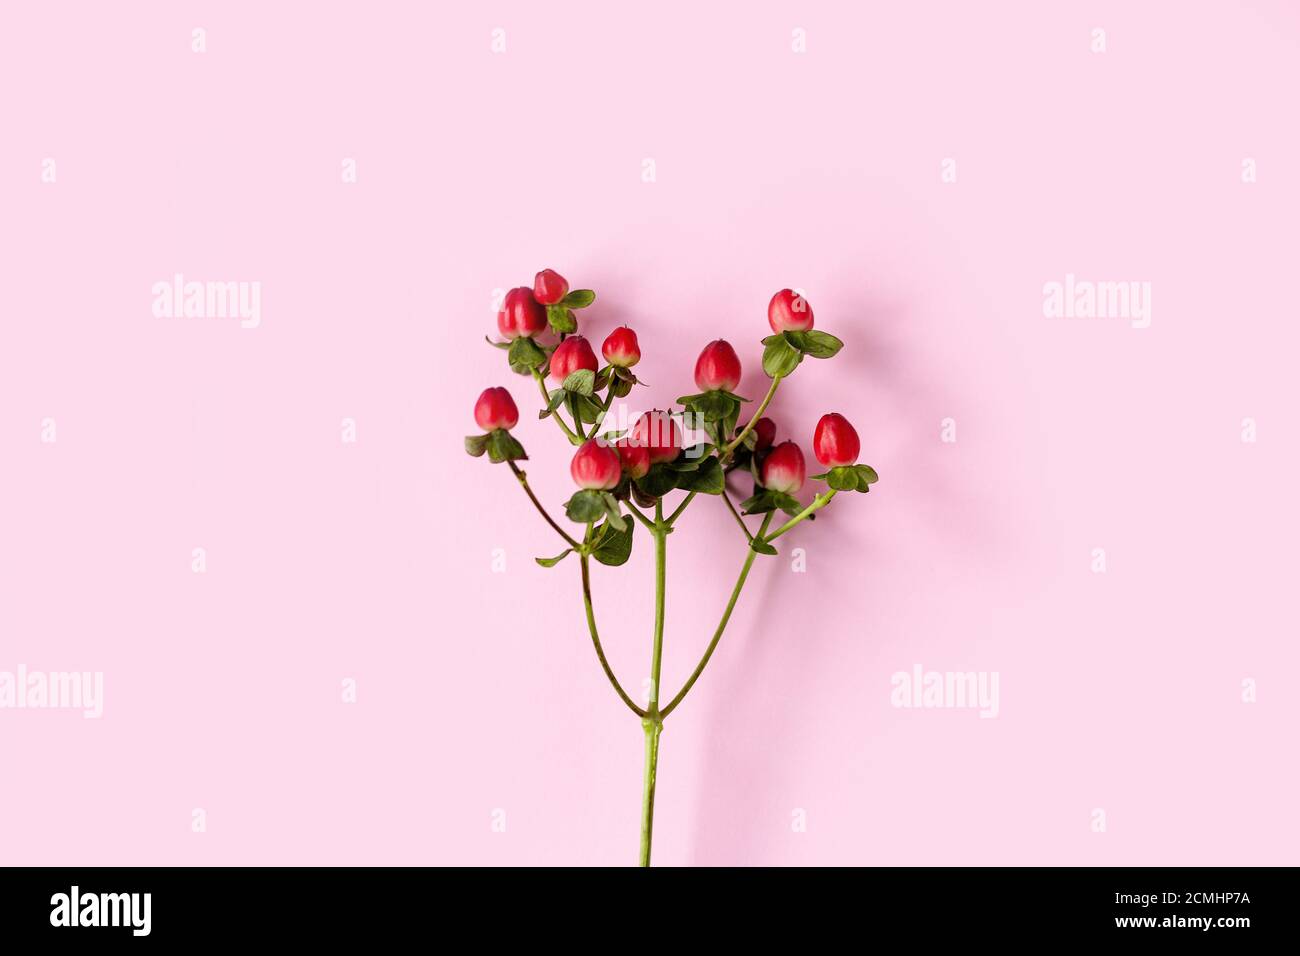 Hypericum perforatum, Red St. John's wort on a pink background, banner, postcard, advertising, homeopathy concept, alternative medicine, red fruit on Stock Photo